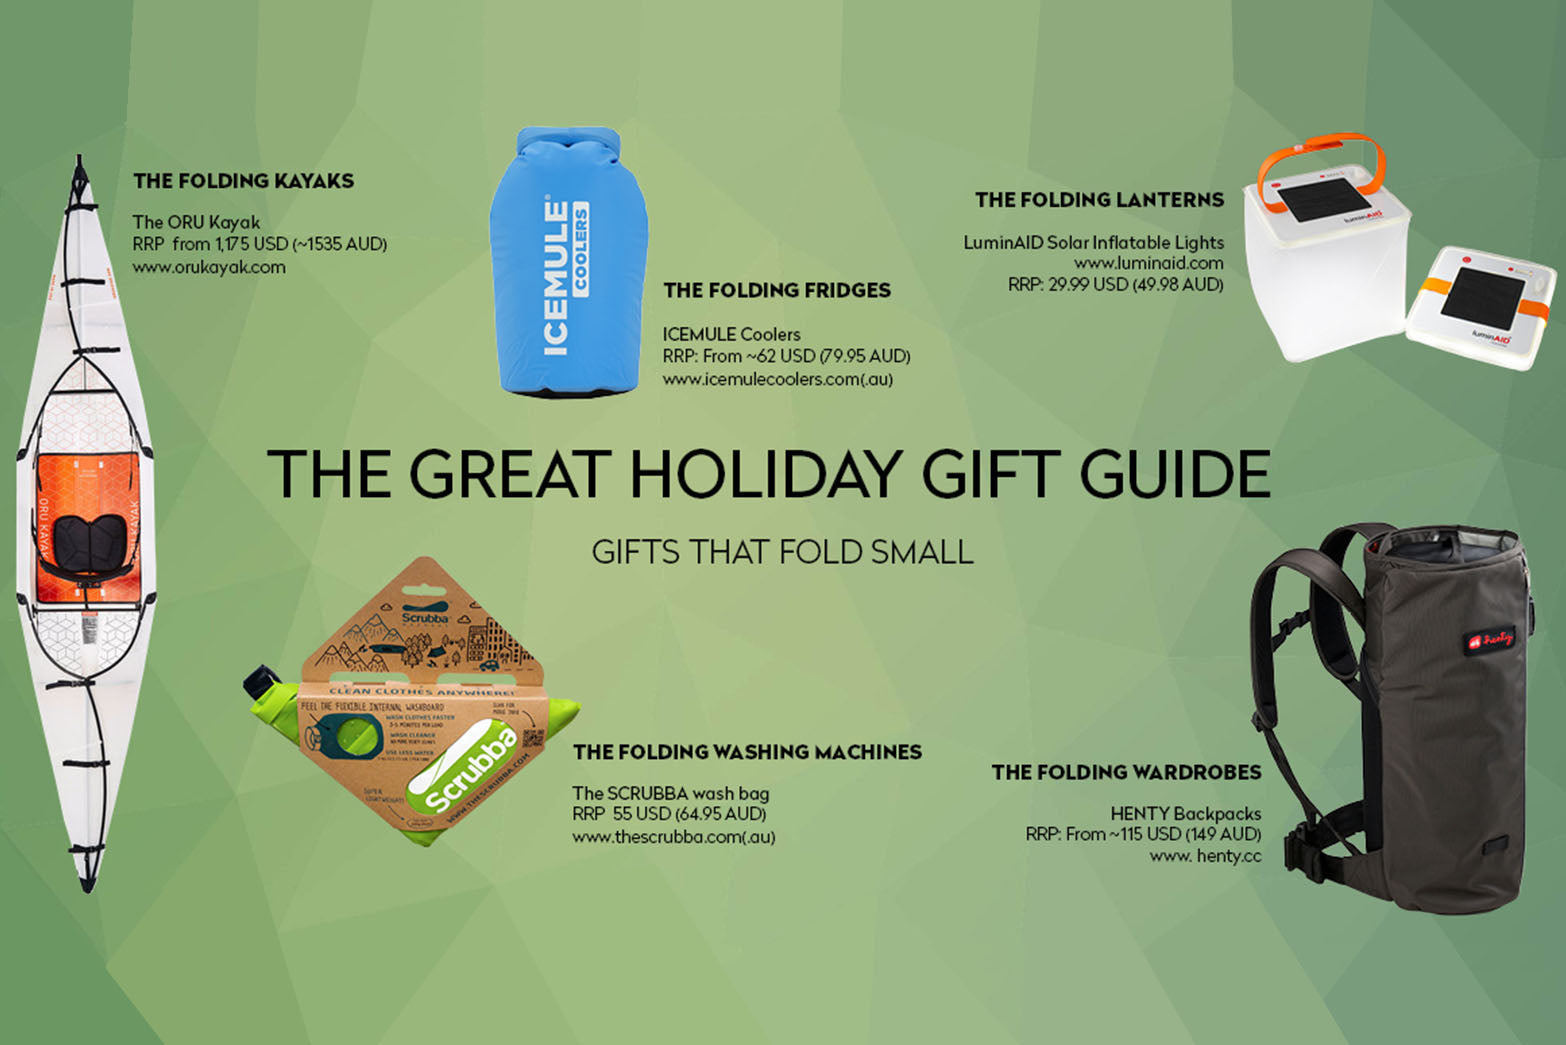 Top 5 Best Gifts for Travelers and Campers